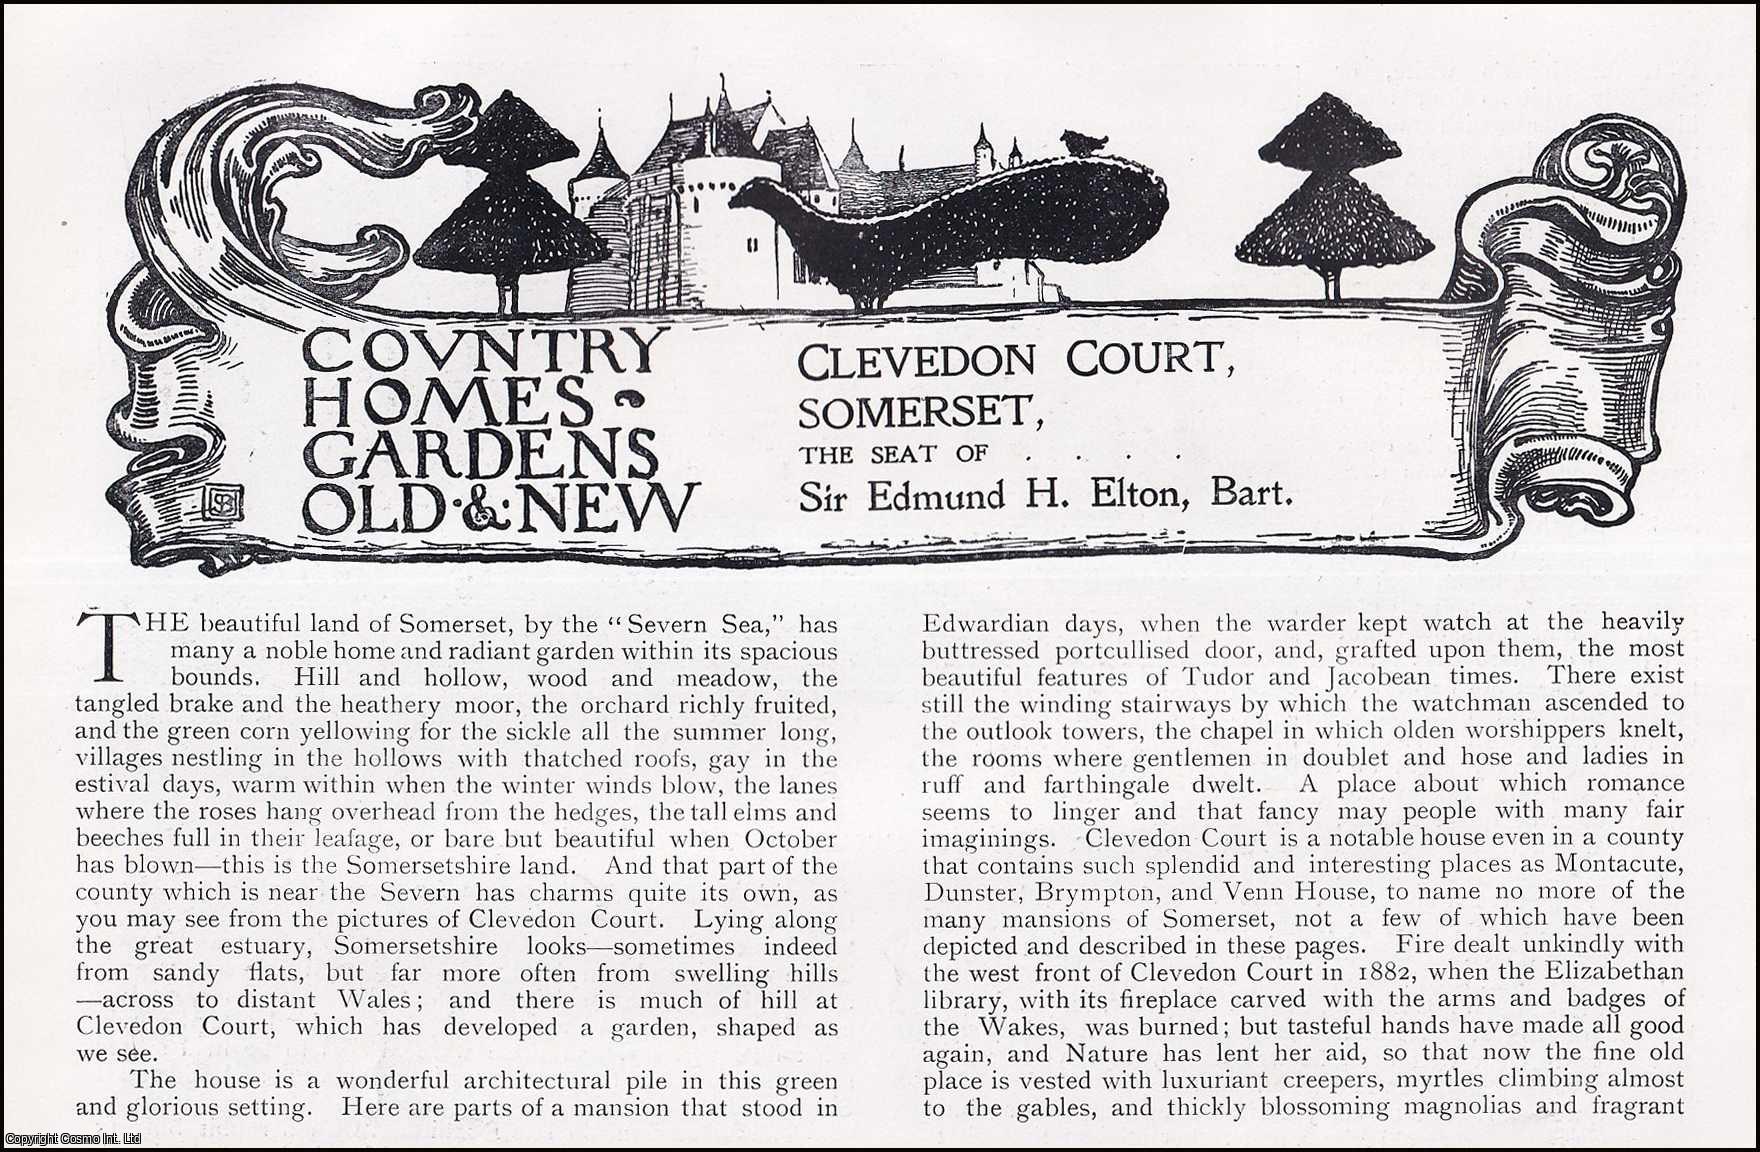 Country Life Magazine - Clevedon Court, Somerset. The Seat of Sir Edmund H, Elton, Bart. Several pictures and accompanying text, removed from an original issue of Country Life Magazine, 1899.